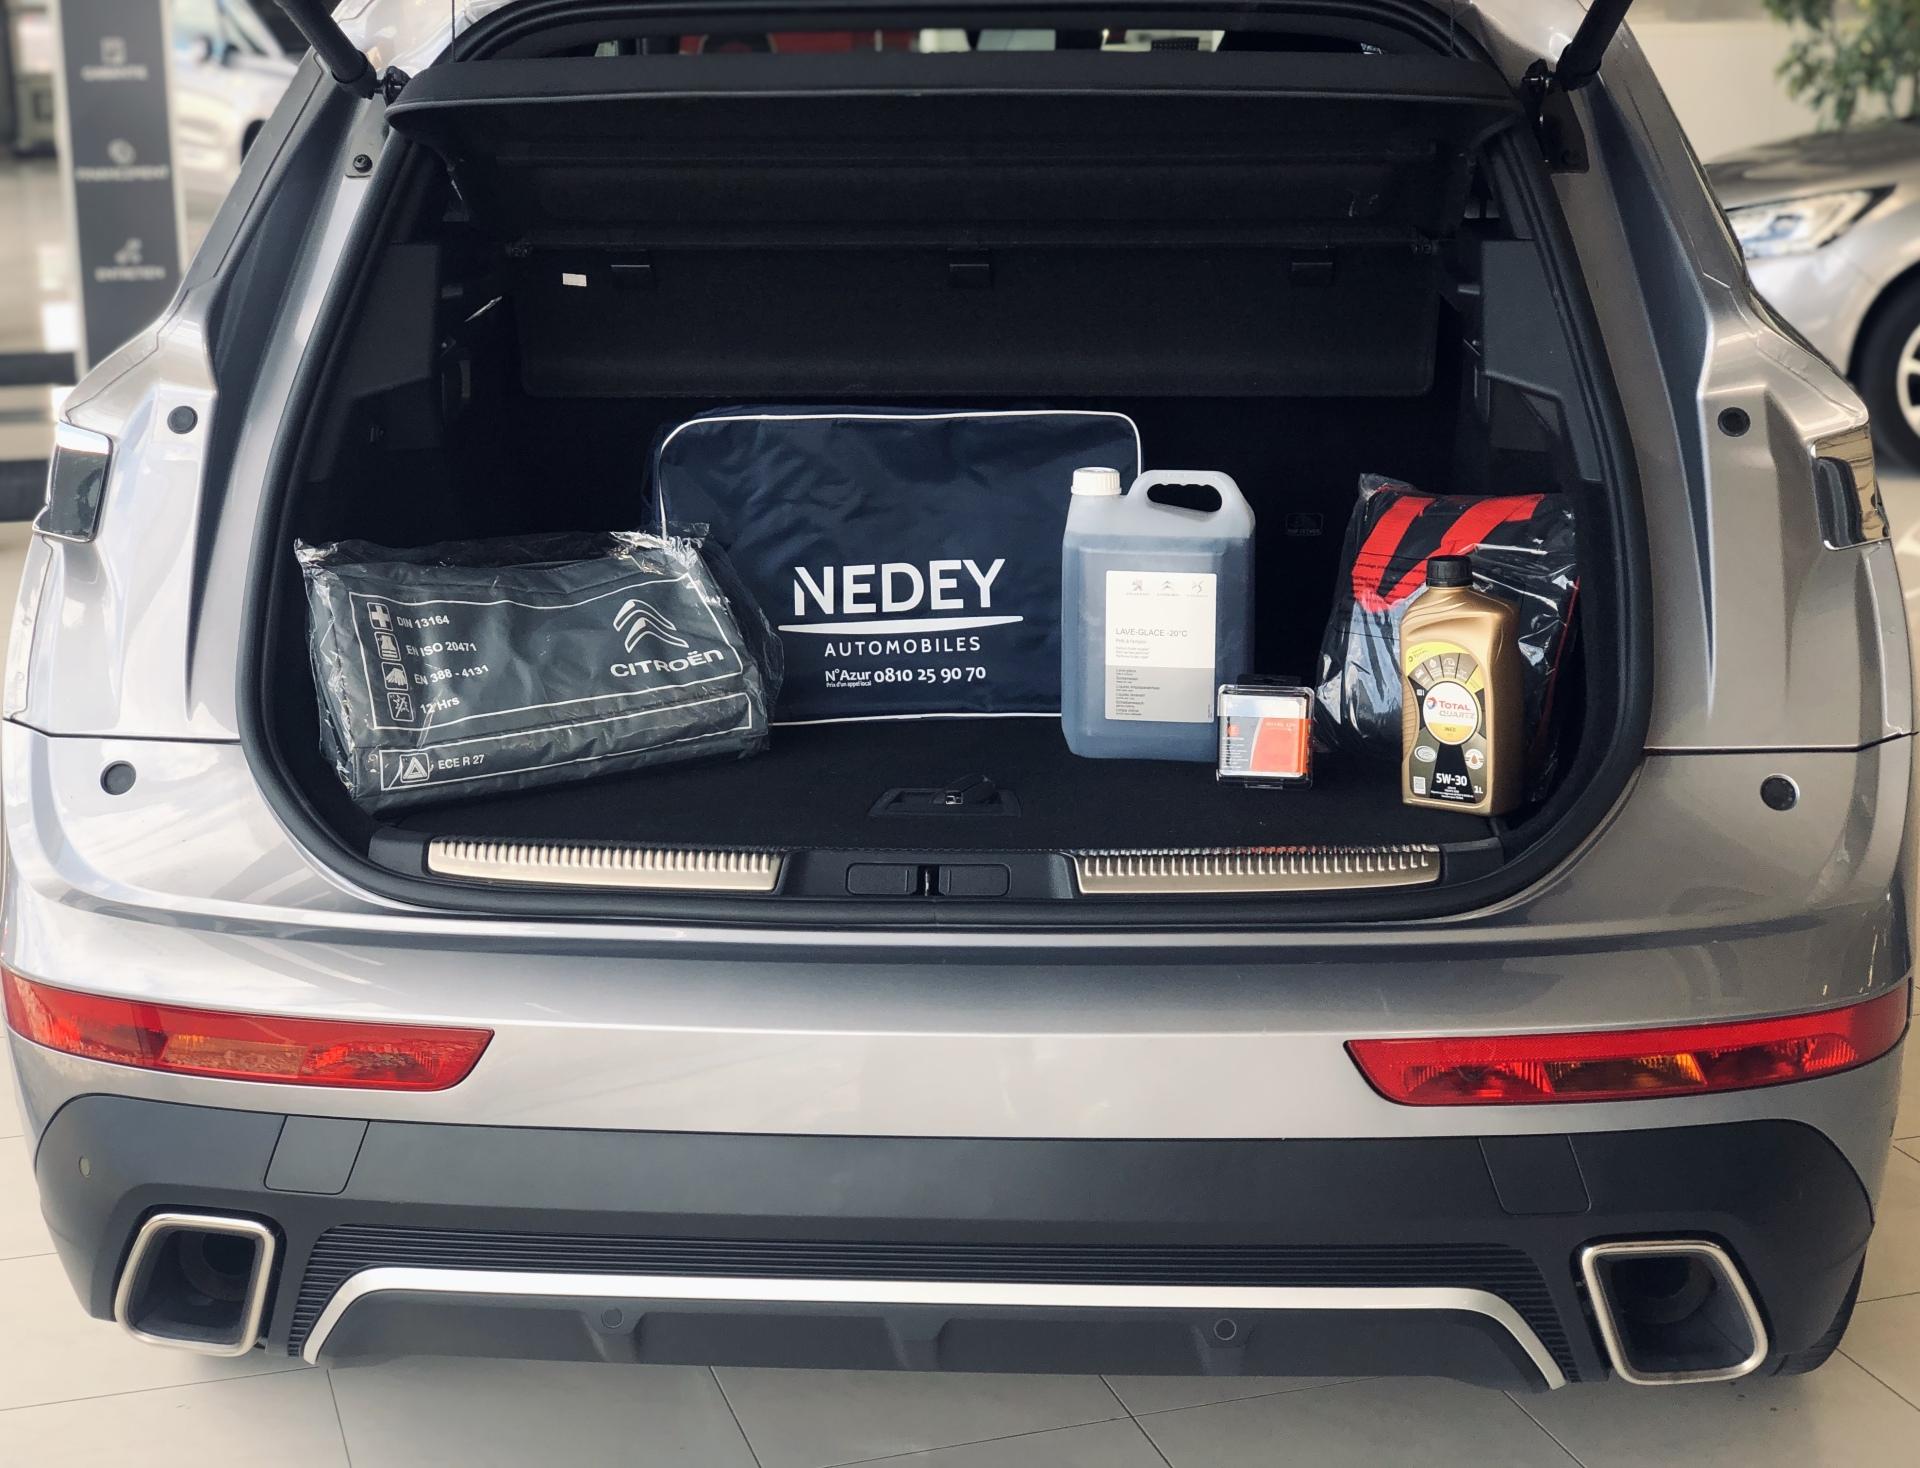 forfait_tranquilite_coffre__nedey_groupe_automobiles